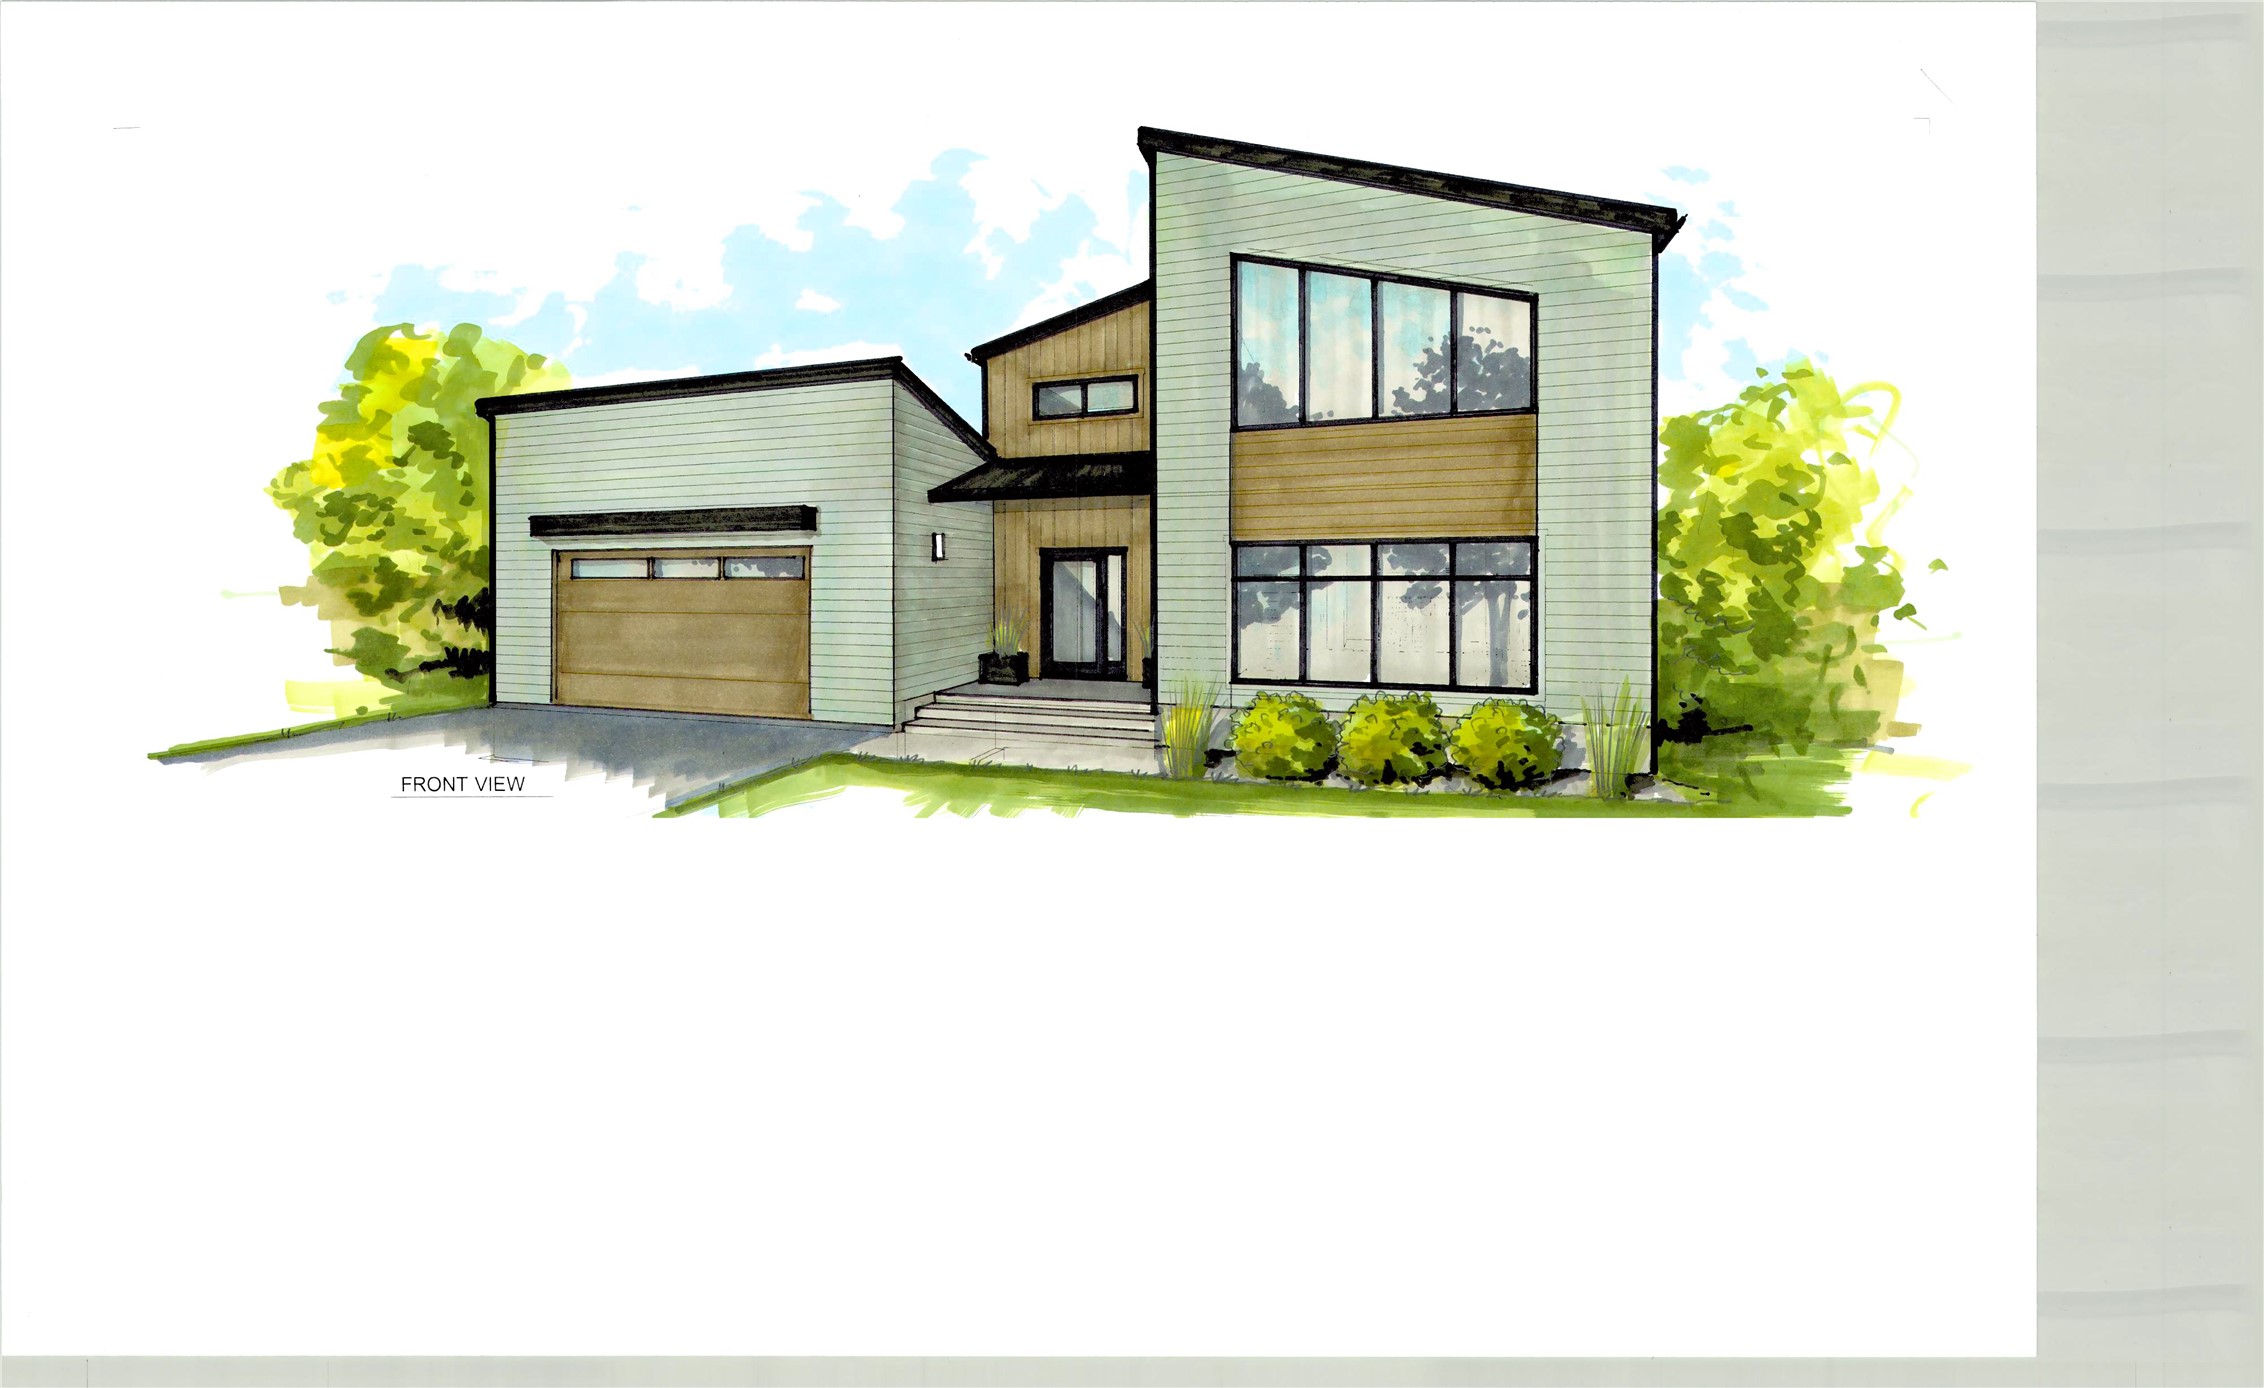 To be built mountain modern home in The Preserve Subdivision. Easy access to the bypass and only minutes from FVCC, Logan Health, and Kalispell's major shopping areas. This Orion floor plan has 2,416SF with 4 beds, 2.5 baths and attached two car garage. House has quartz countertops, large kitchen island, additional family room, & underground sprinklers. Subdivision offers walking trails, dog park, and play ground all within close distance to the home. Contact Cecil Waatti 406.890.4000 Layne Massie 406.270.6664 or your real estate professional.